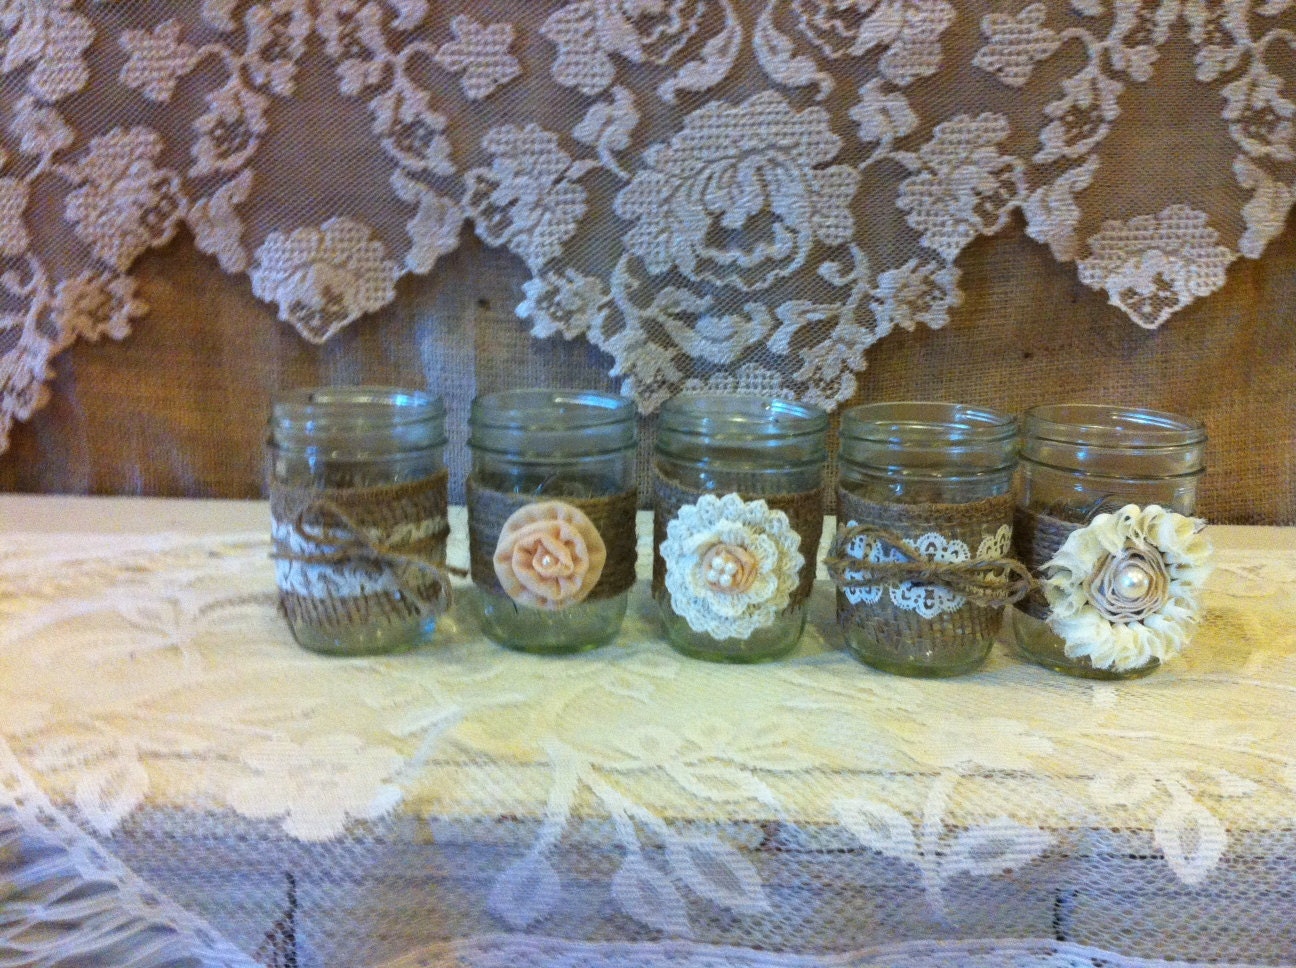 BURLAP LACE MASON Jars Candle Holders  for Wedding and Cottage Decor : Rustic Farm House and Shabby chic/Vintage style decorations